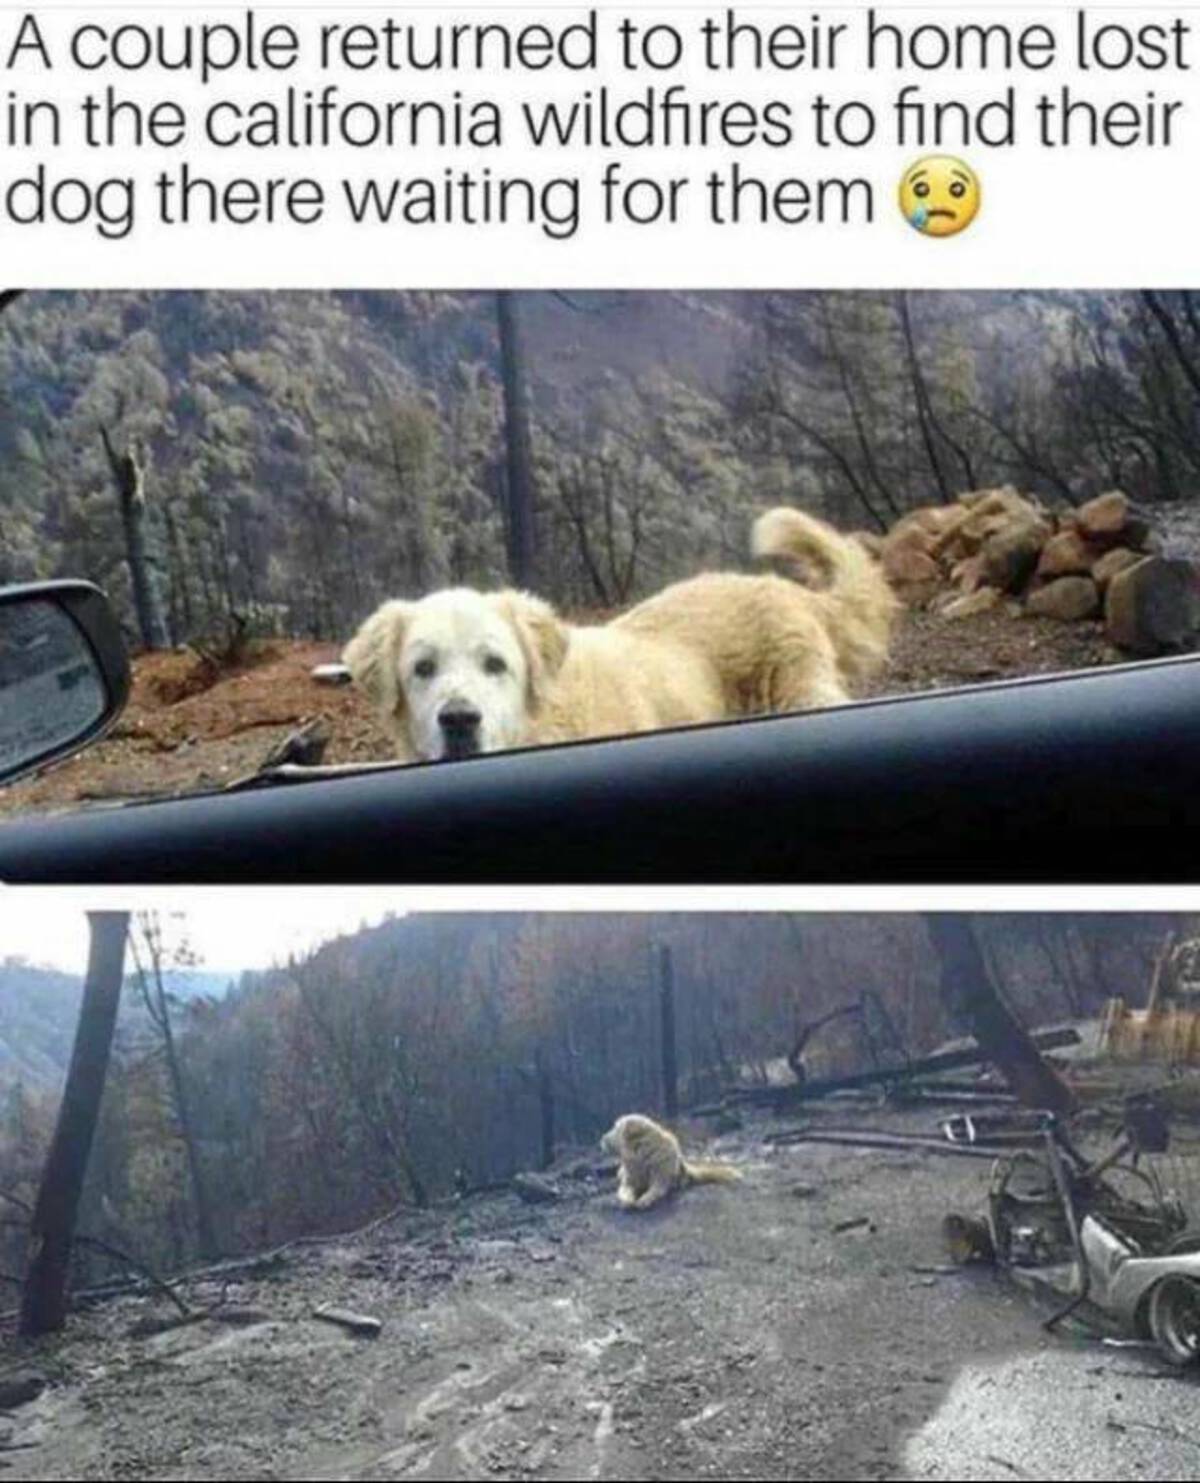 fire dog survivor - A couple returned to their home lost in the california wildfires to find their dog there waiting for them